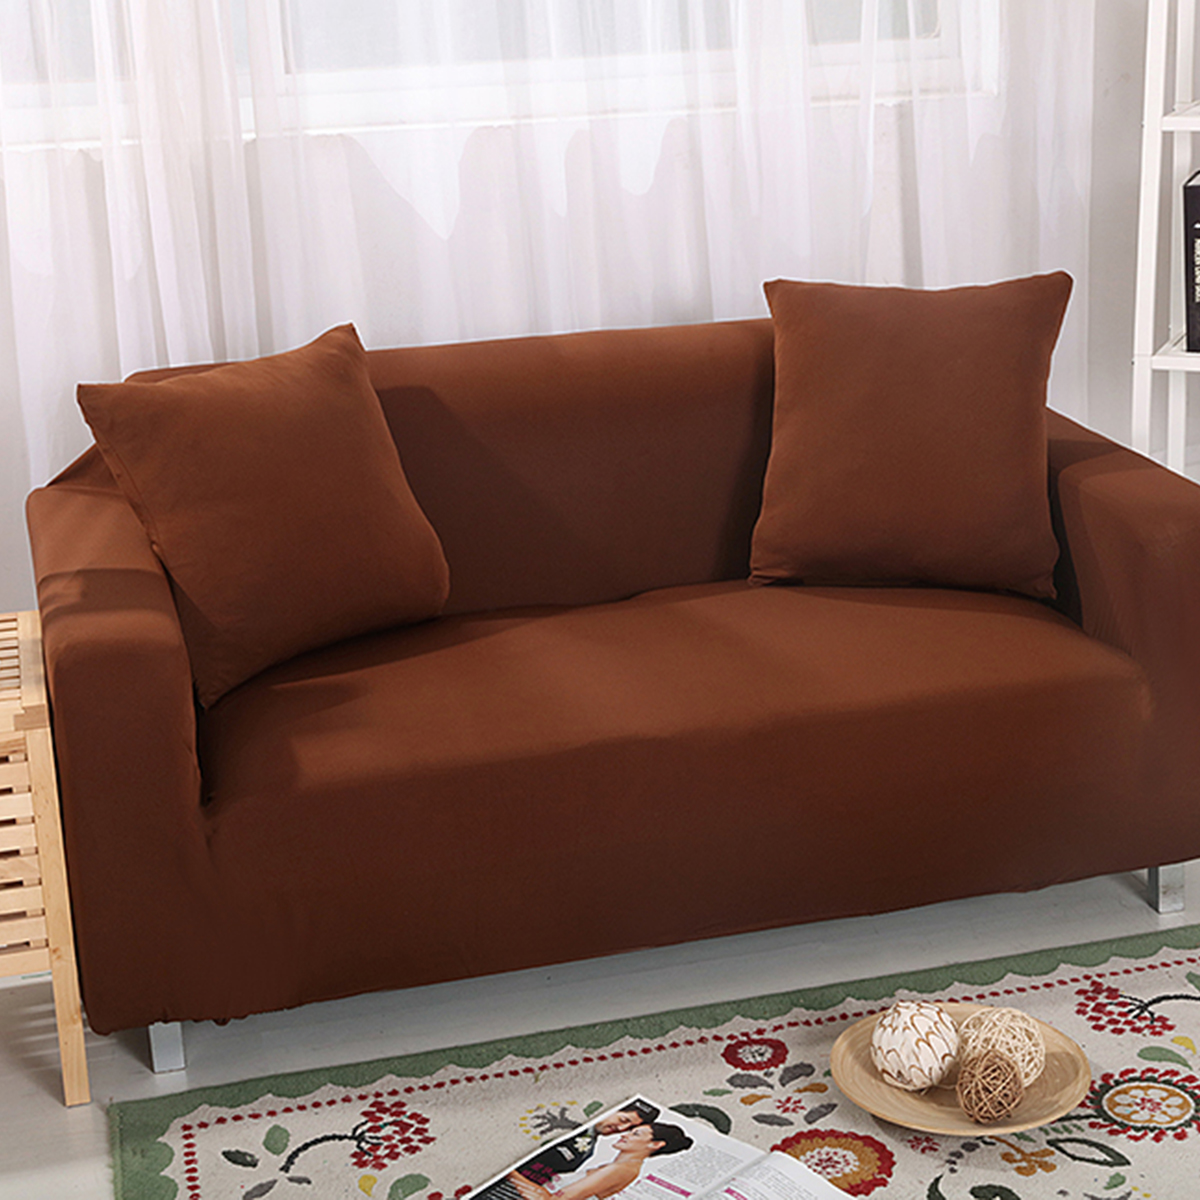 Details about   Solid Stretch Chair Sofa Cover 1 2 3 4 Seater Couch Elastic Slipcover Protector 